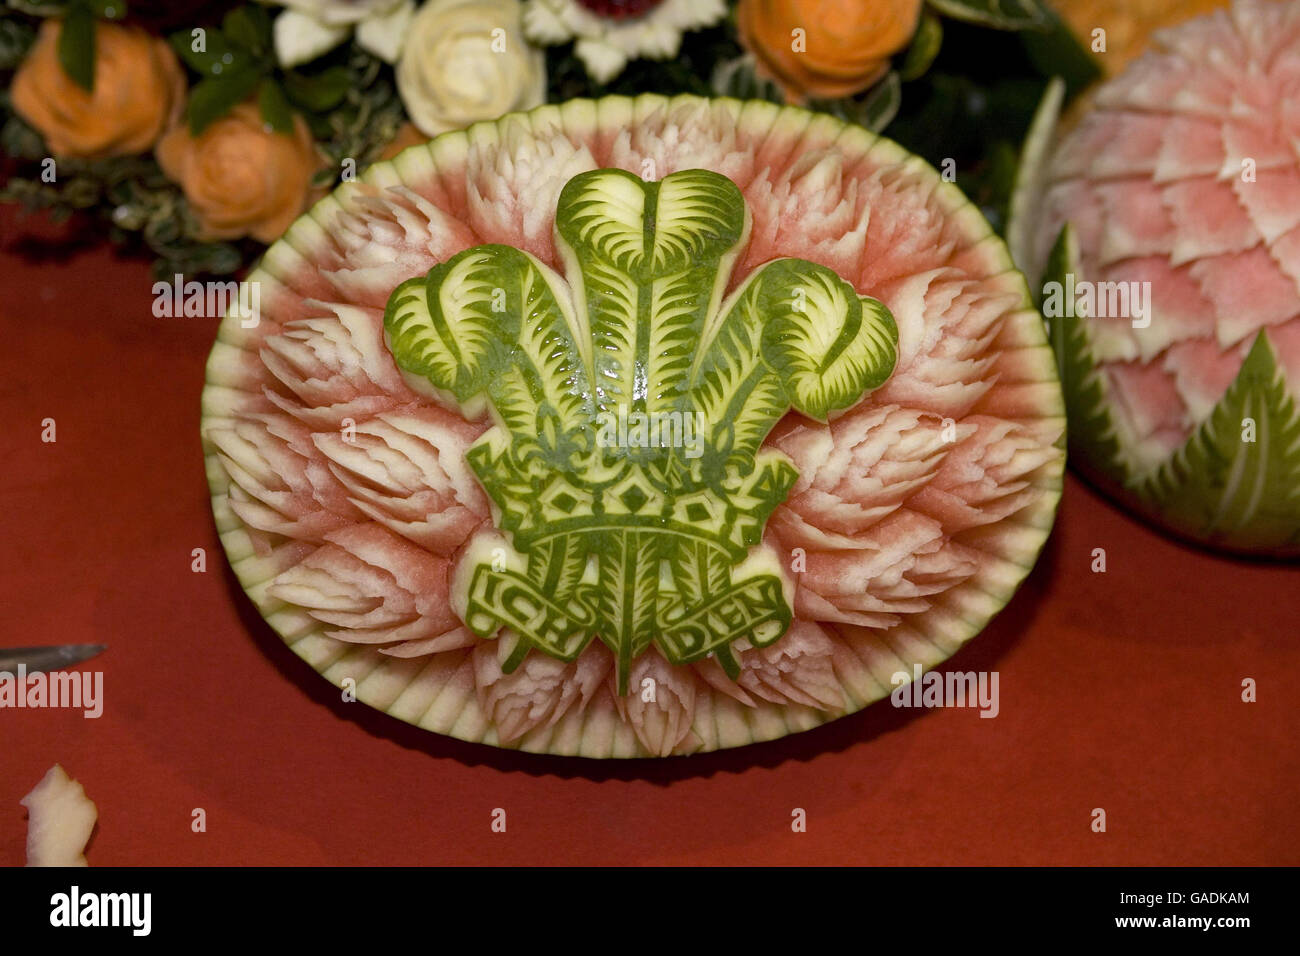 A melon has been cut in the design of the Prince of Wales' emblem the Fleur de Lys, as the Prince and the Duchess of Cornwall participate in Diwali preparations during a visit to Shri Swaminarayan temple in Neasden, northwest London. Stock Photo